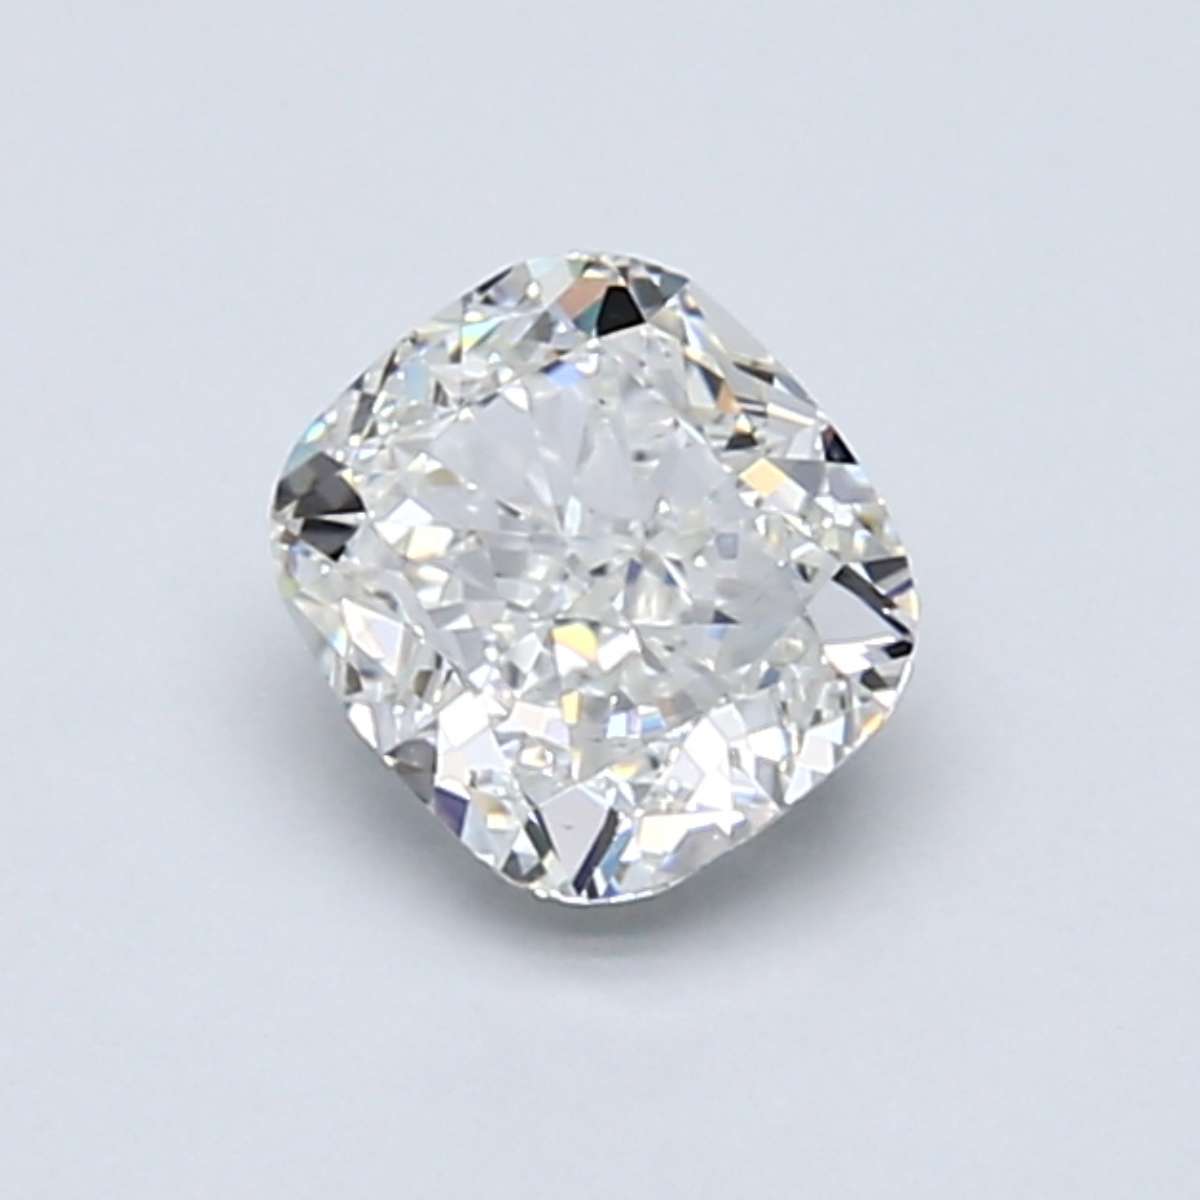 Cushion 0.9 Carat G Color VS2 Clarity For Sale